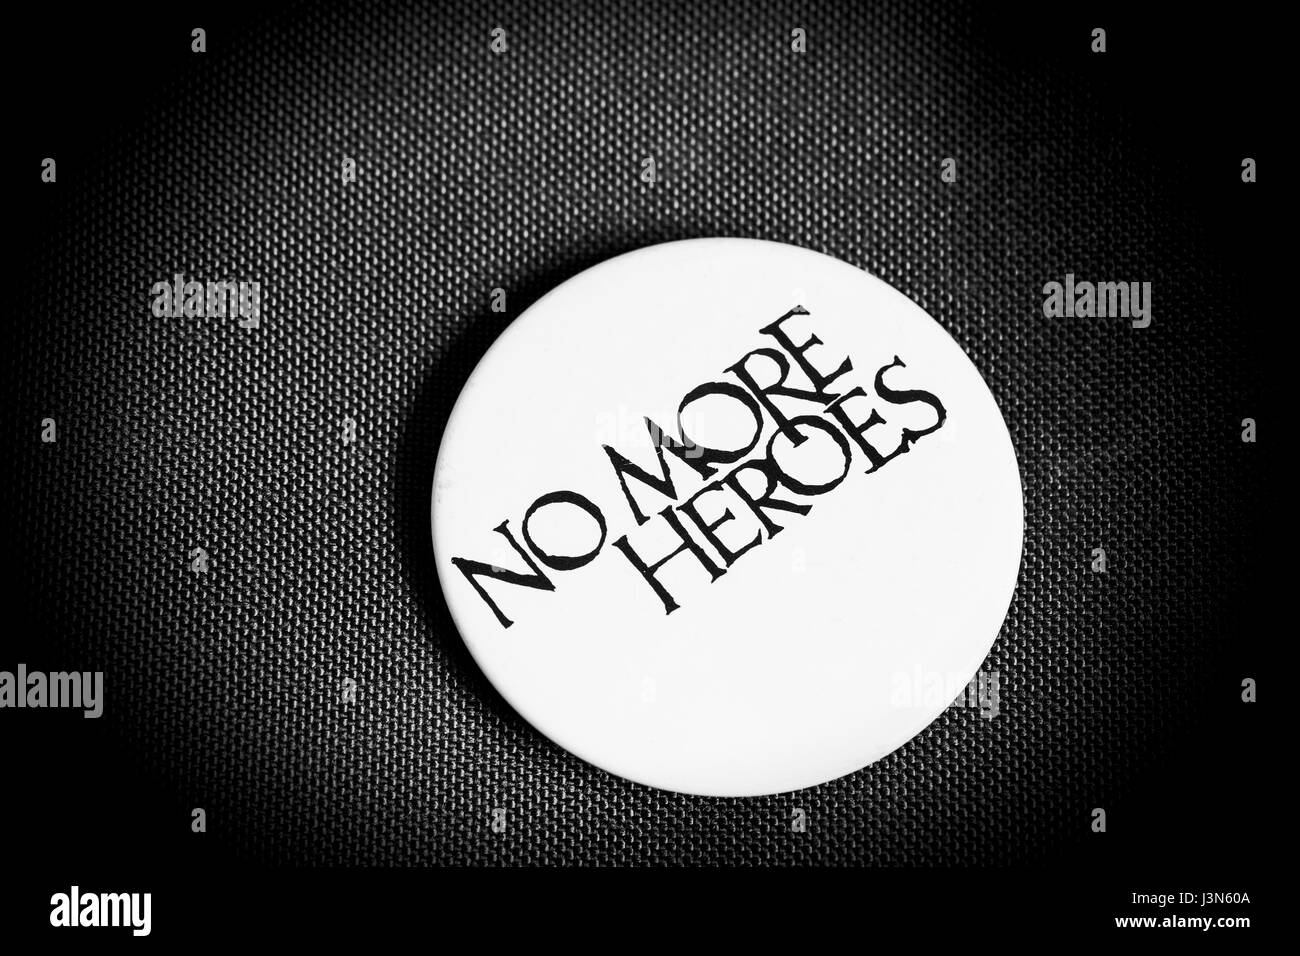 No More Heroes - Abzeichen Stockfoto